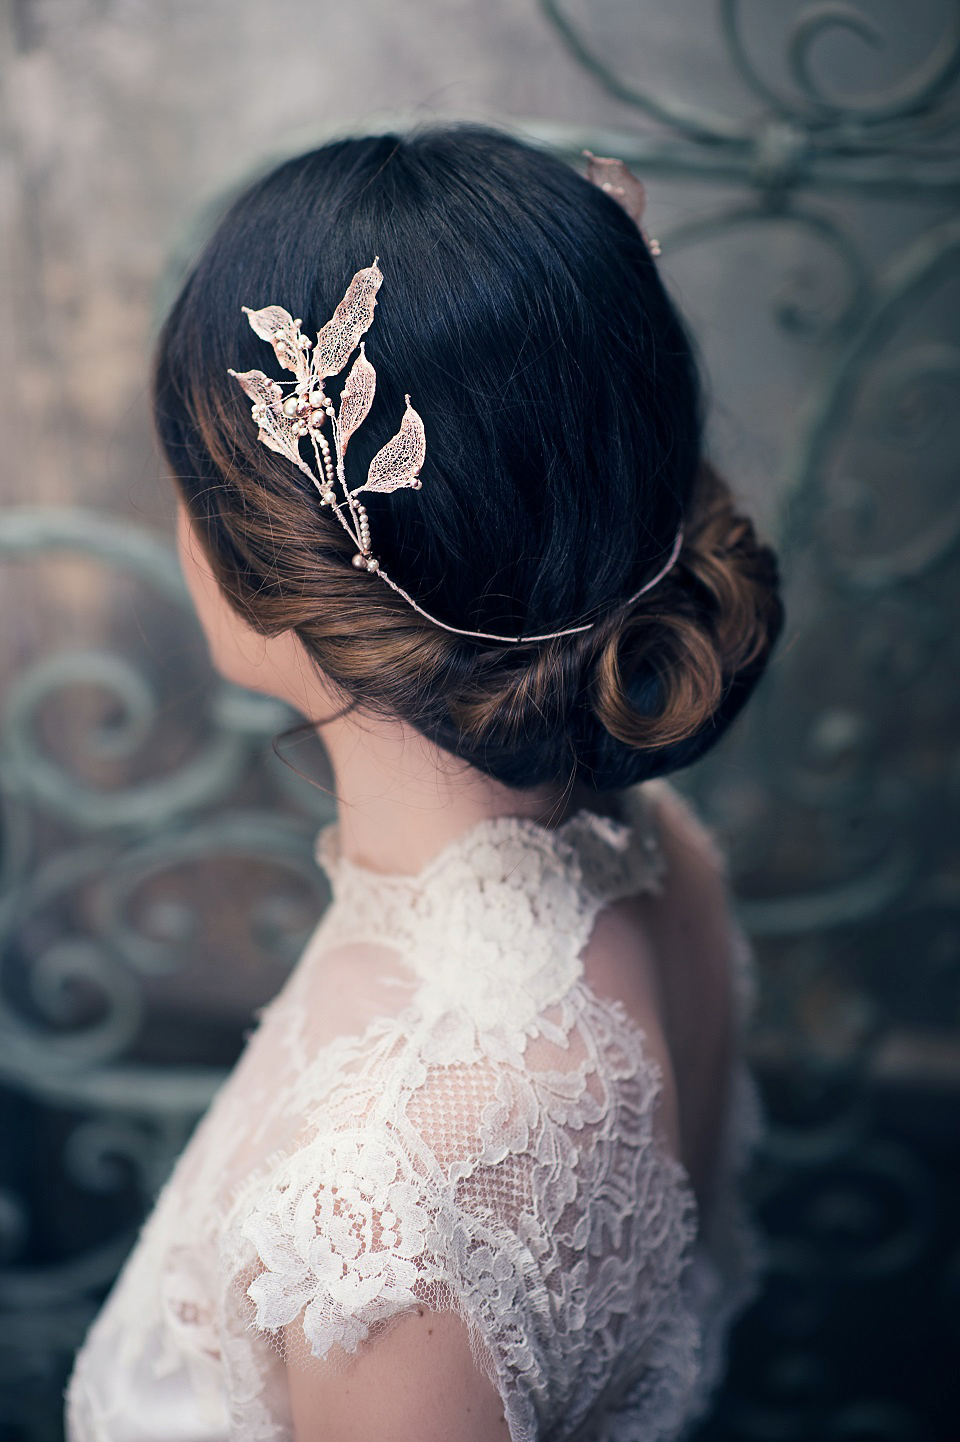 Nature’s Diadem by Cherished – An Ethereal New Collection of Bridal Accessories